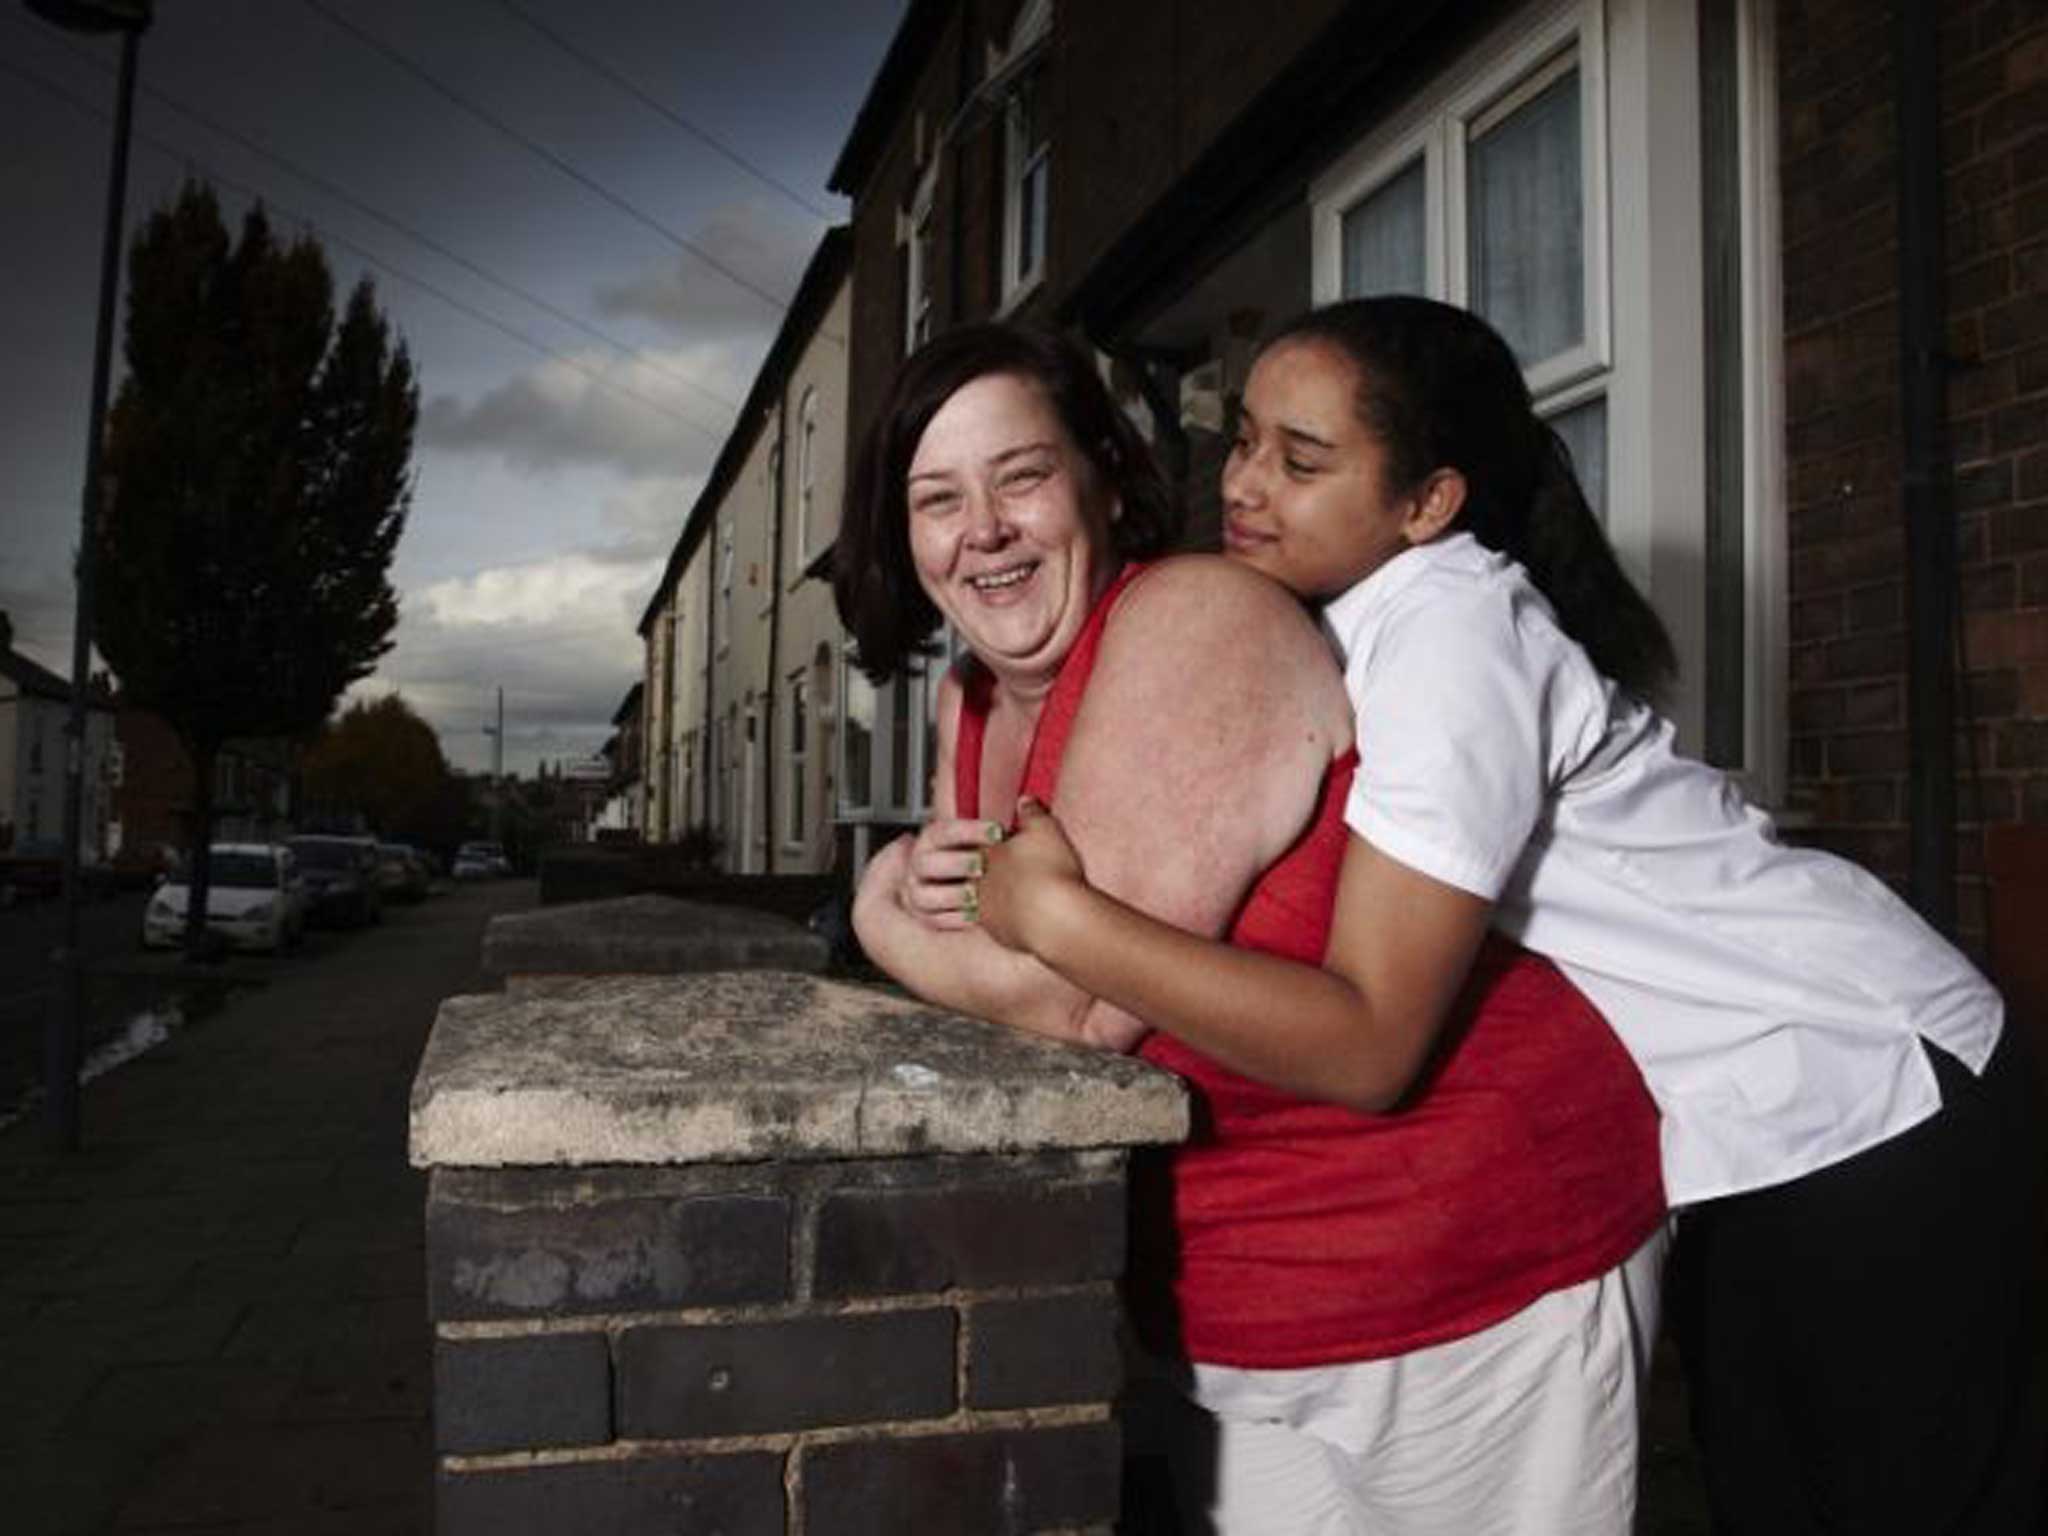 Channel 4’s controversial ‘Benefits Street’ is to be investigated by Ofcom